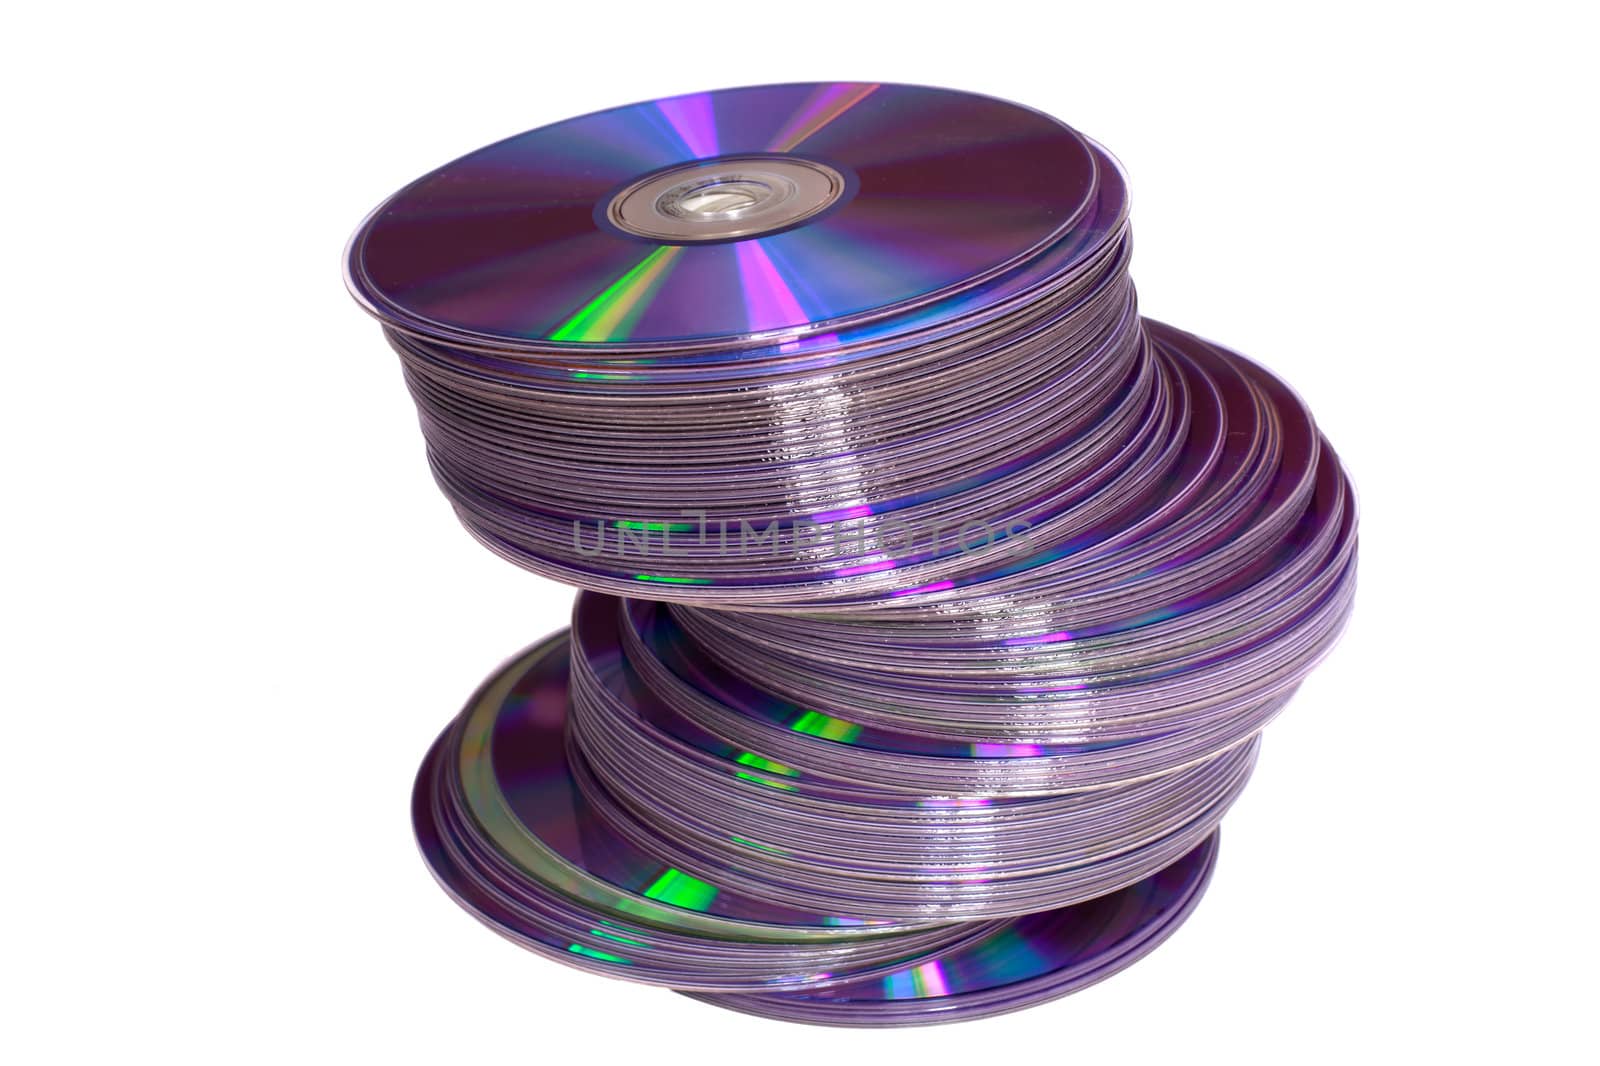 A pile of dvd discs isolated on white
